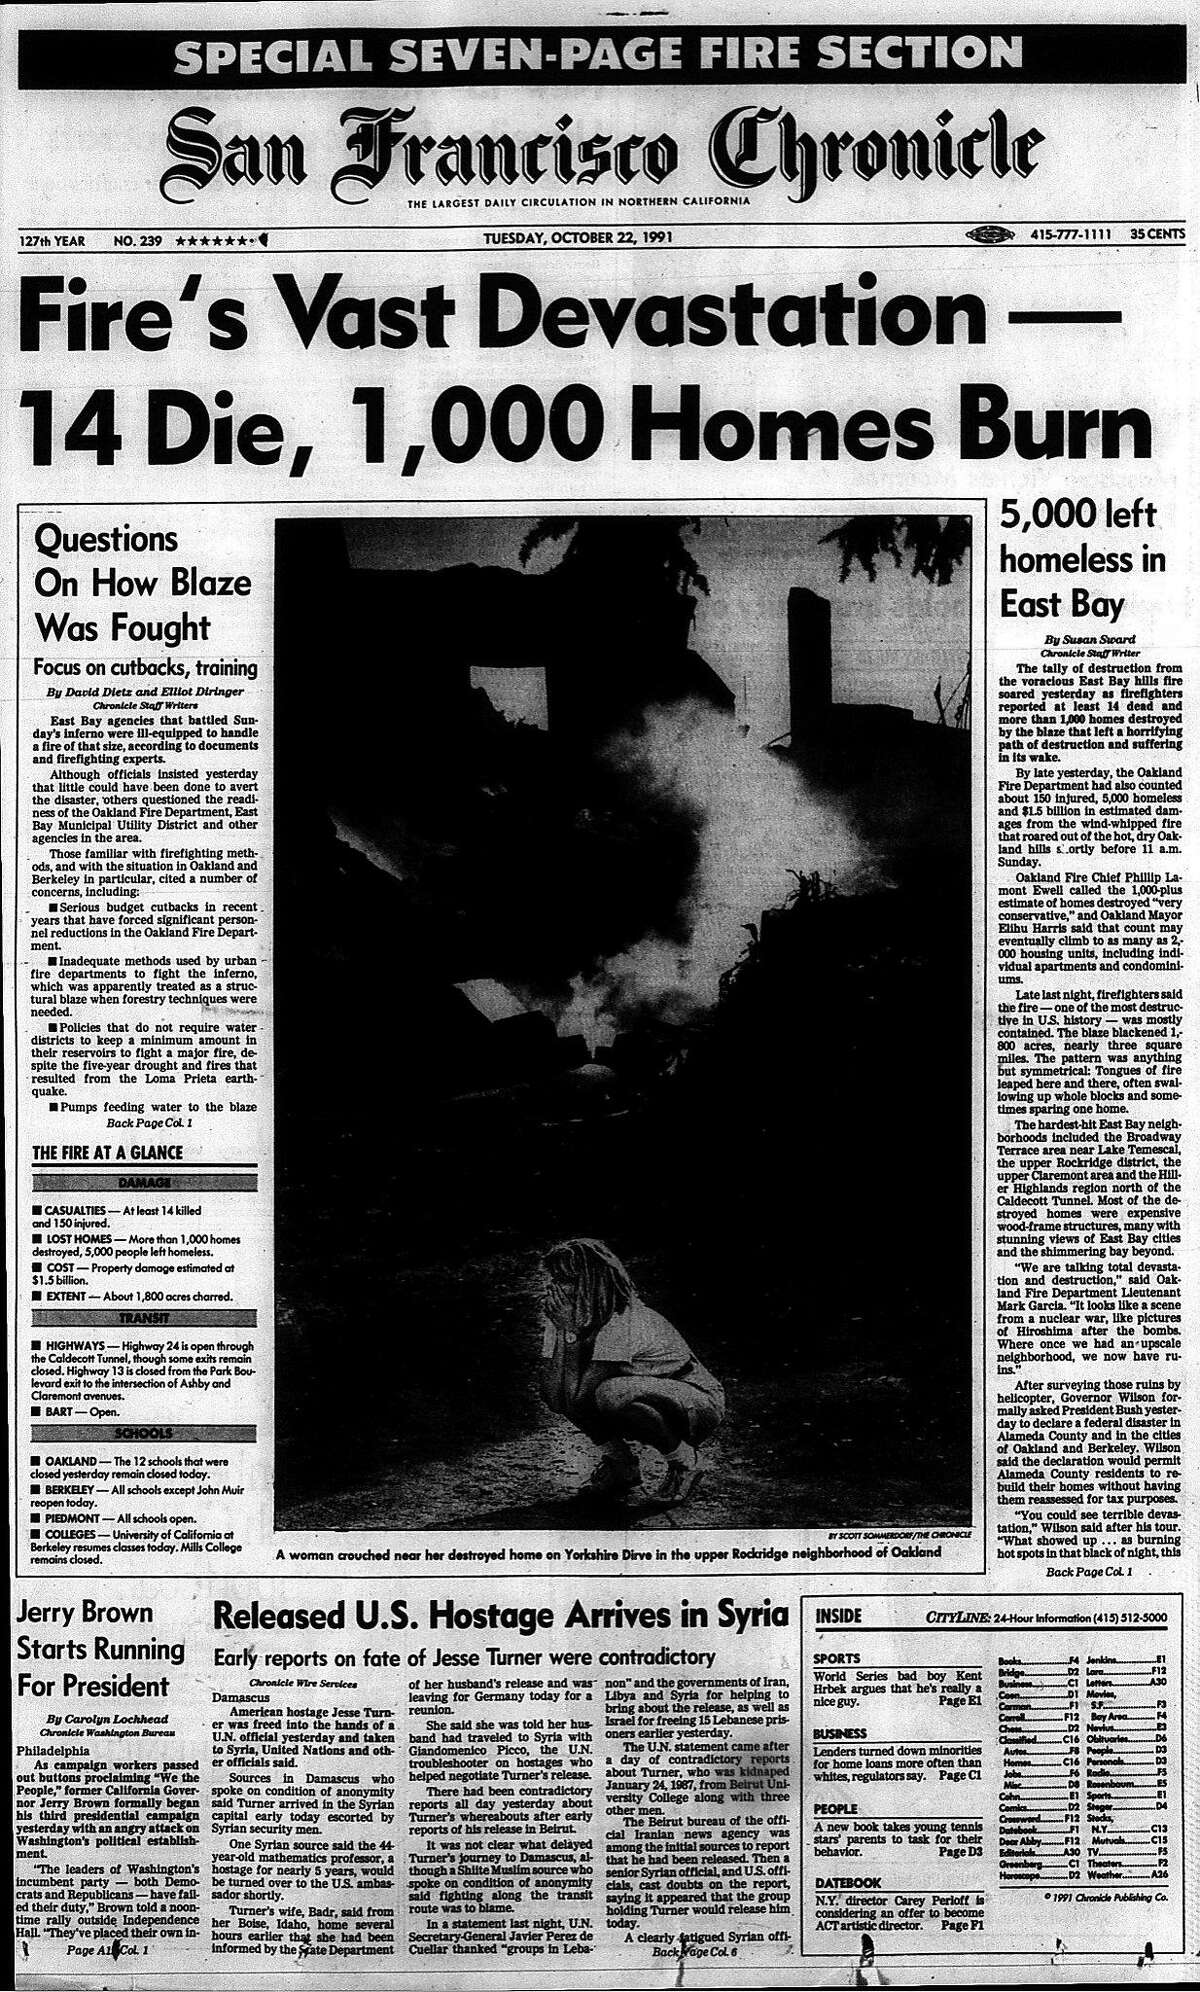 Historic Chronicle Front Page October 22, 1991 Massive Oakland Berkeley hills fire